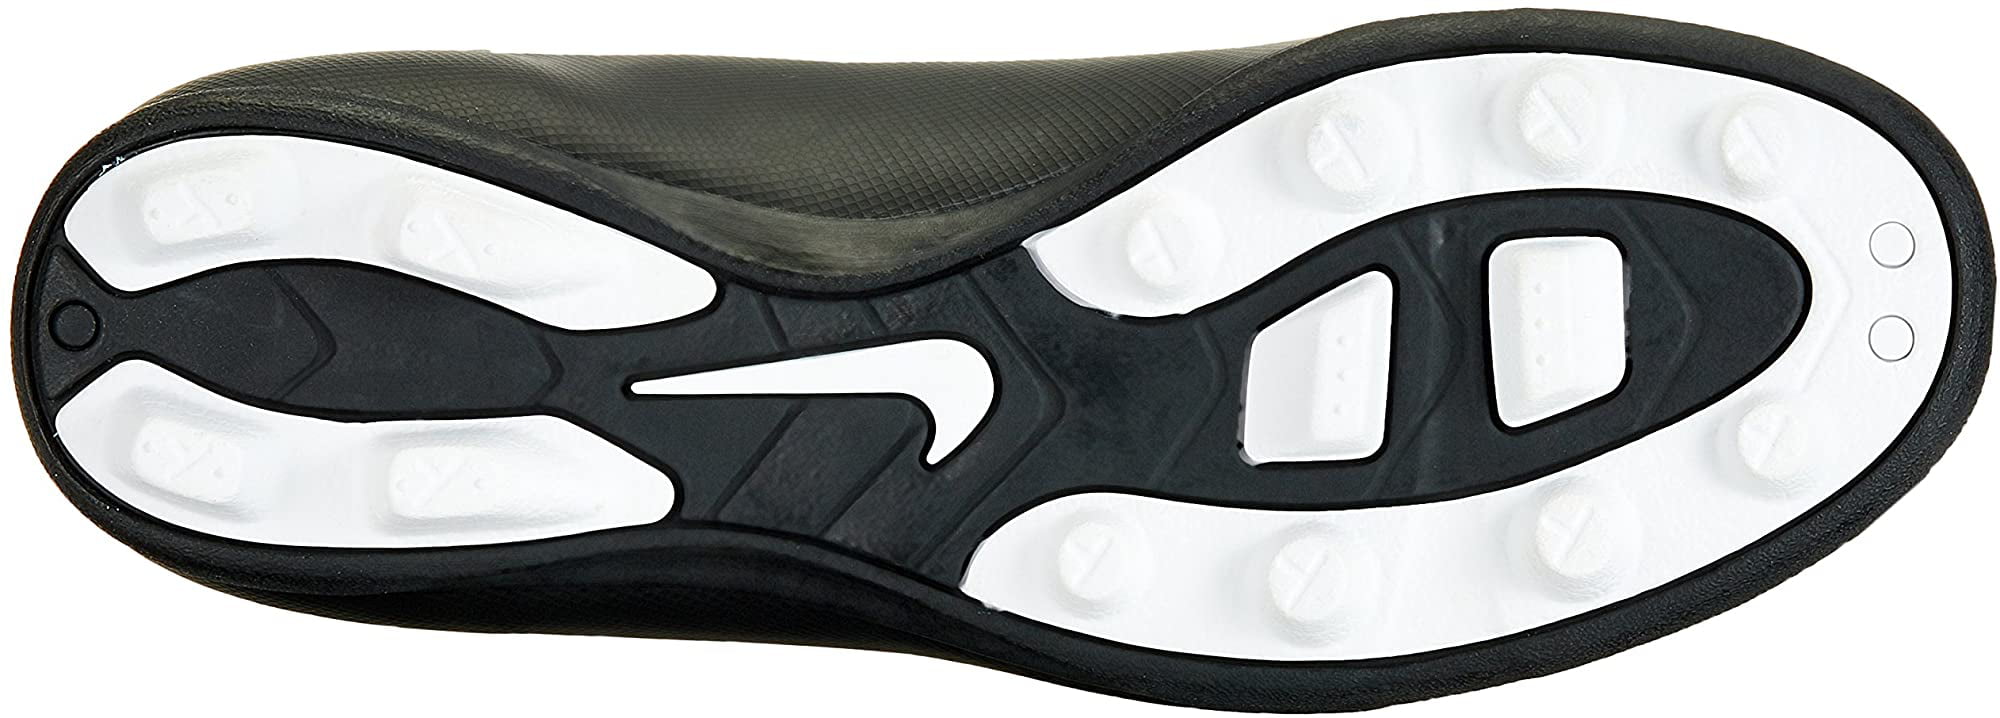 JR Premier III FG-R Youth Soccer Cleats 4.5 White